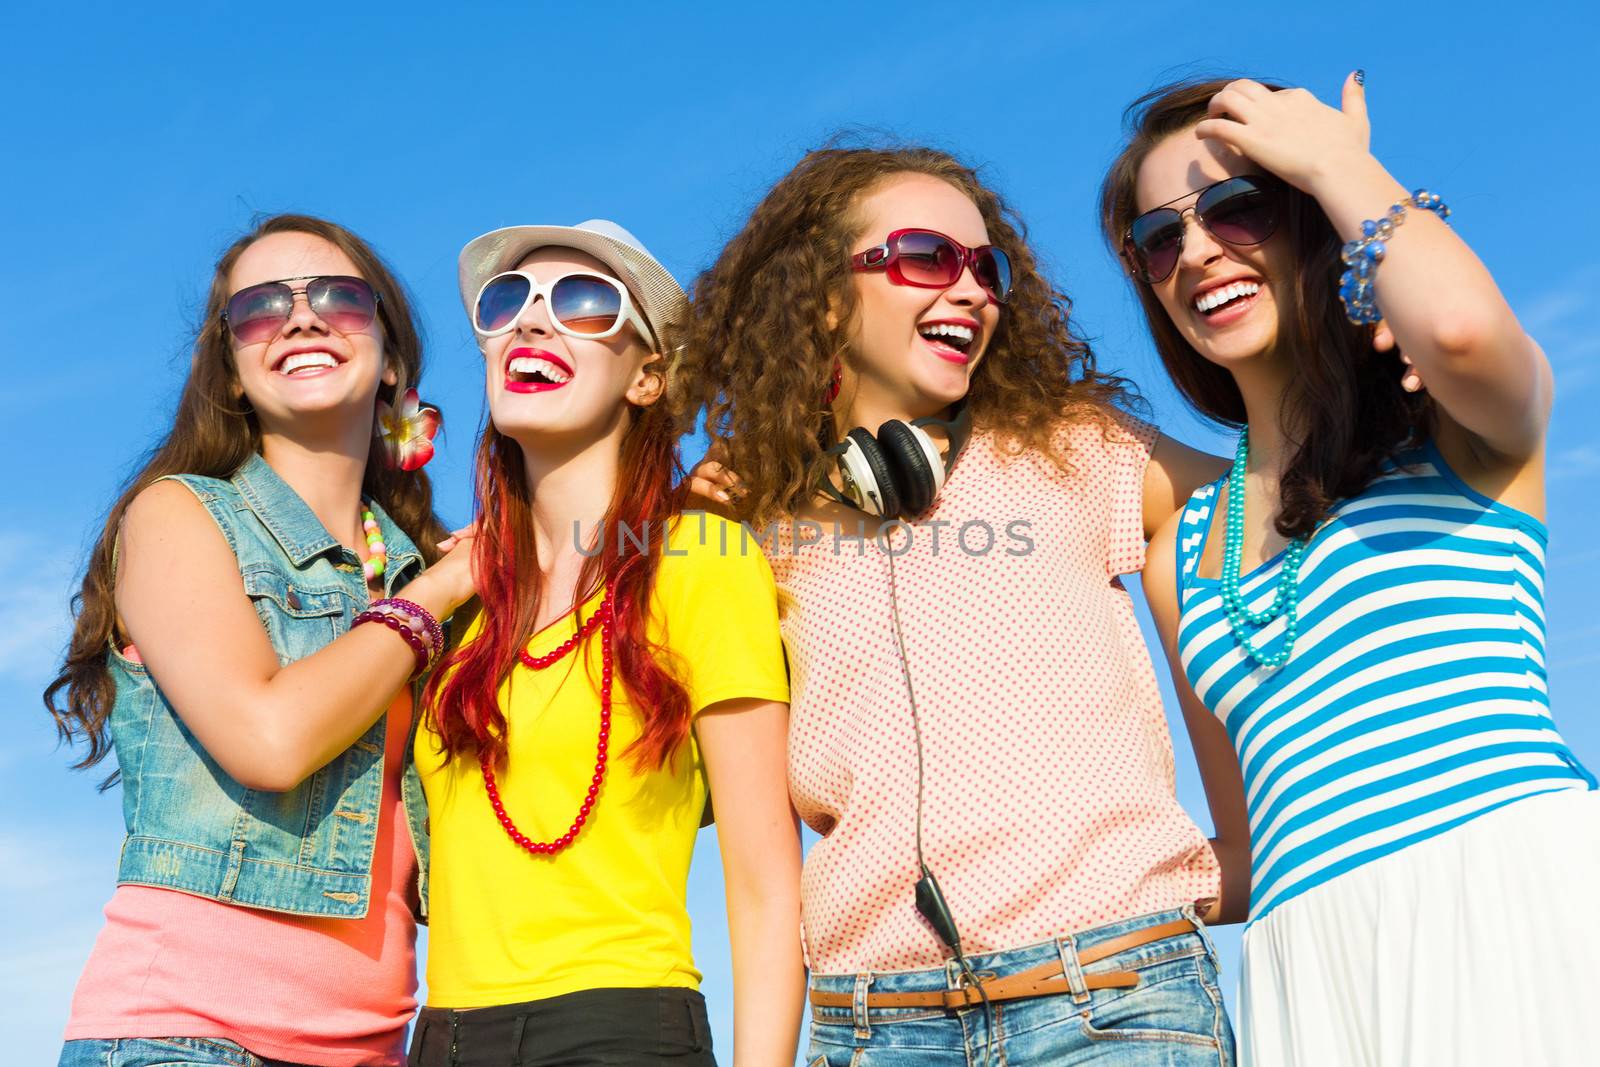 Image of four young attractive girls having fun outdoors